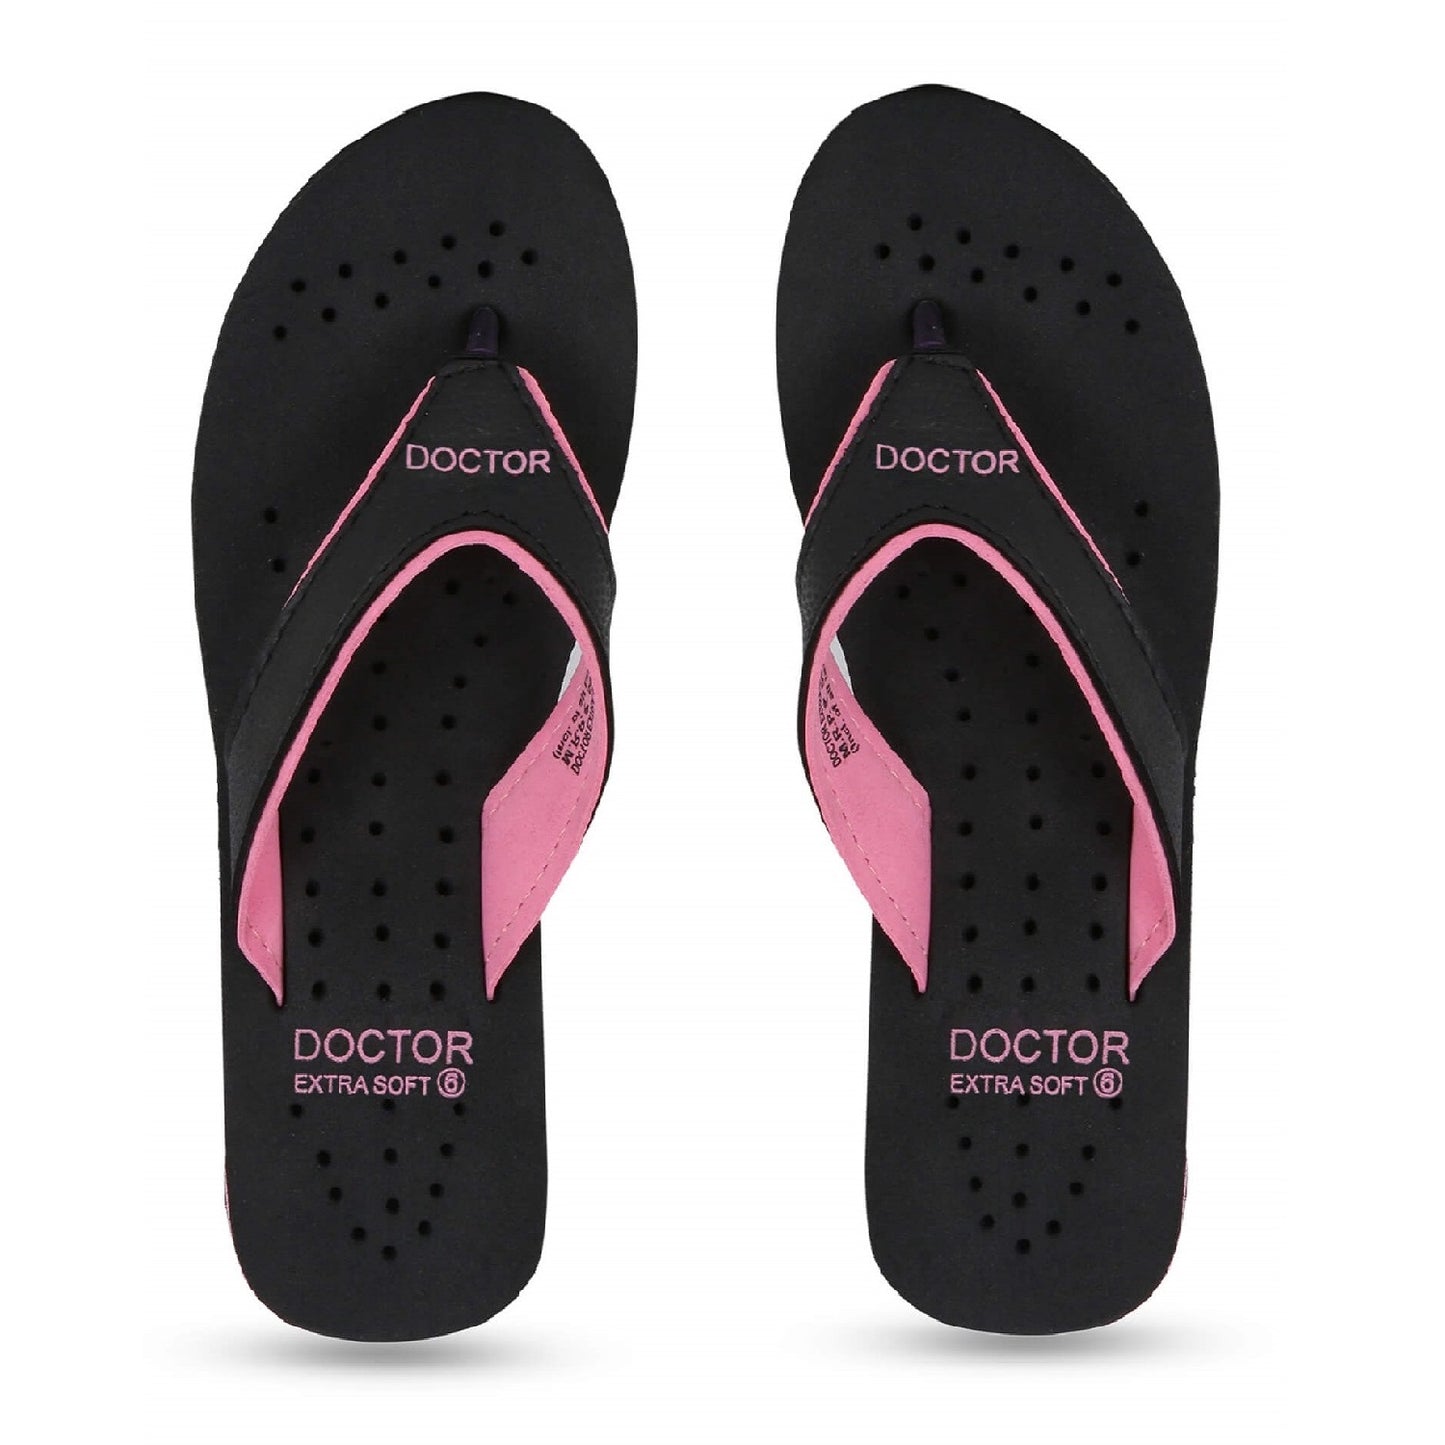 DOCTOR EXTRA SOFT Women's Slippers/Flip-flops OR-D-18 Anti-Skid & Pregnancy, House Slippers